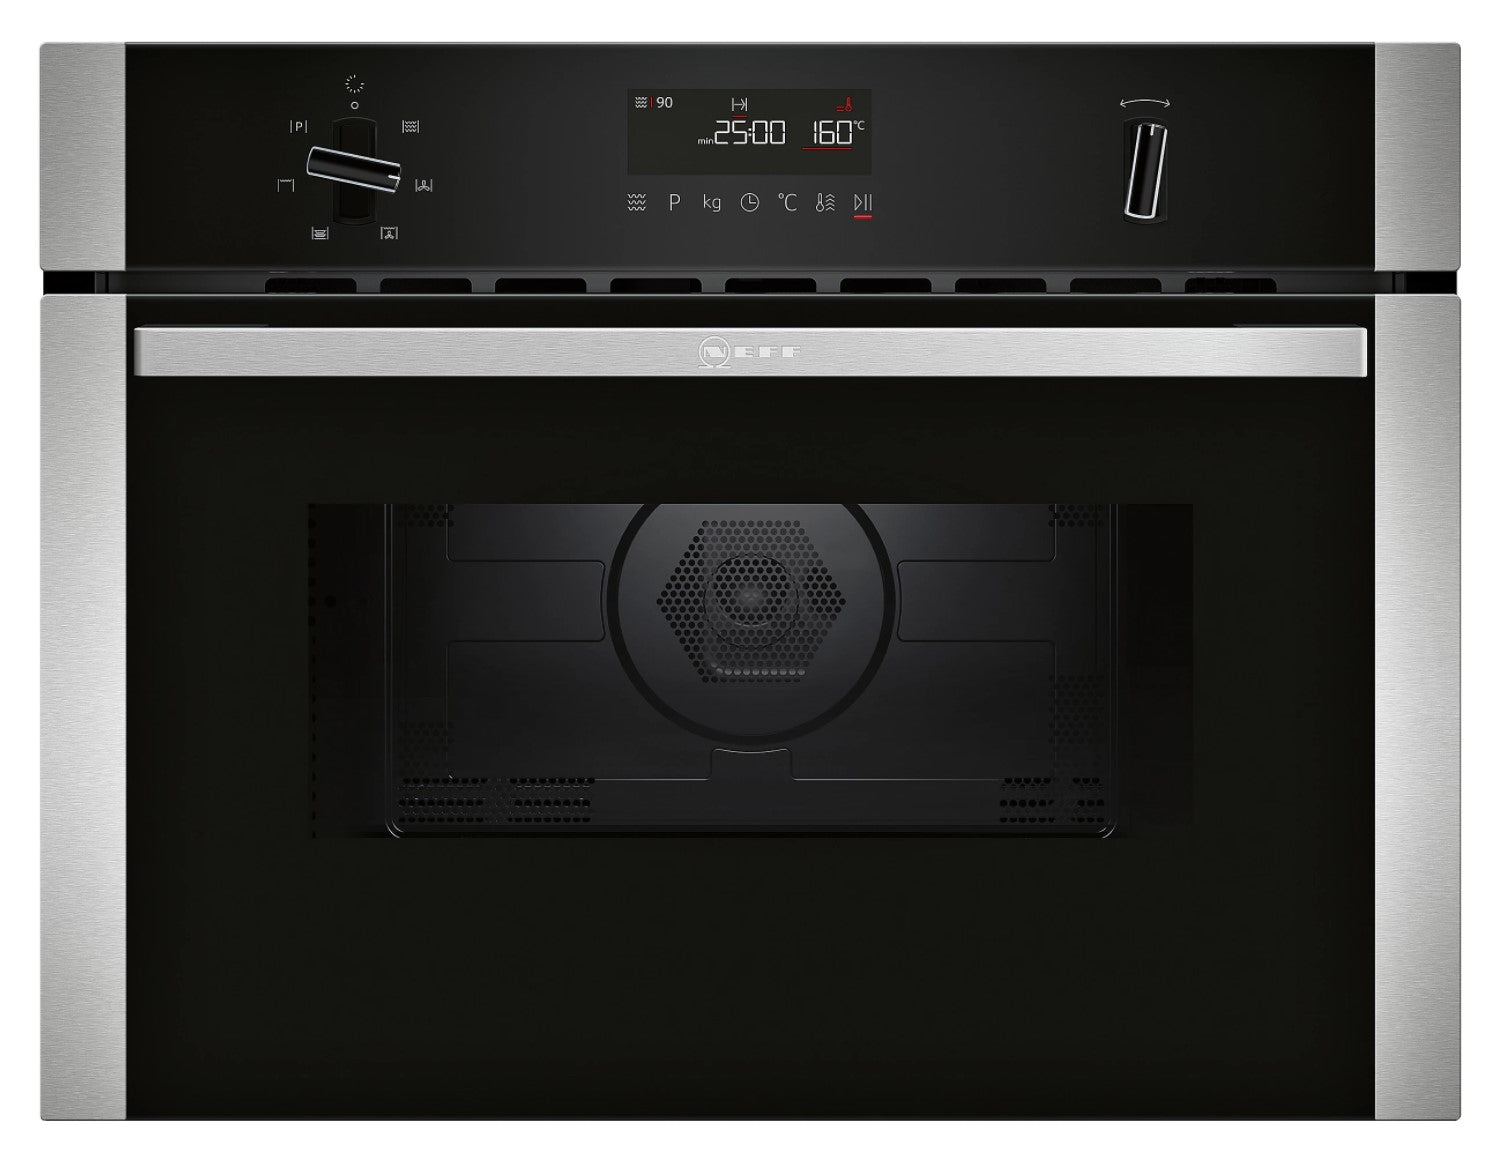 Neff Microwave Oven Built-in 60 x 45 cm Stainless Steel C1AMG84N0B 2036